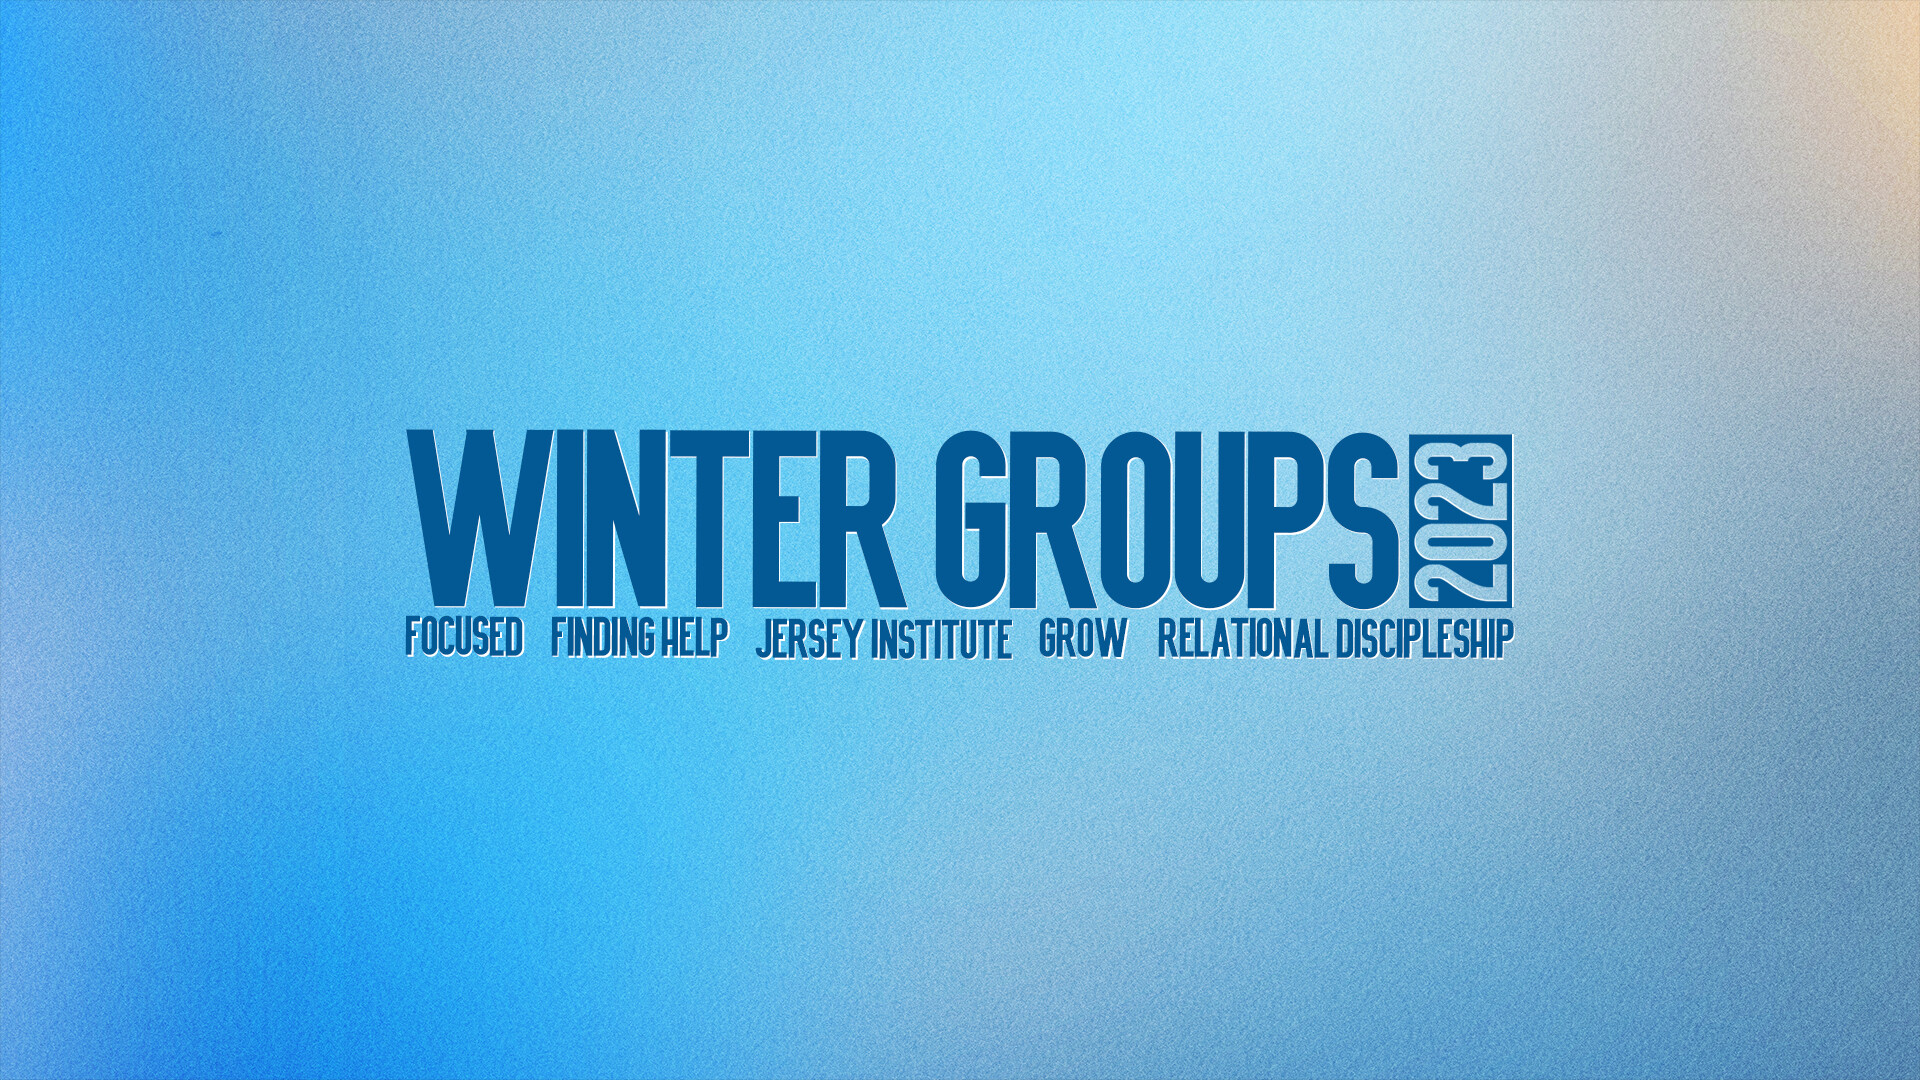 Winter Groups at Jersey